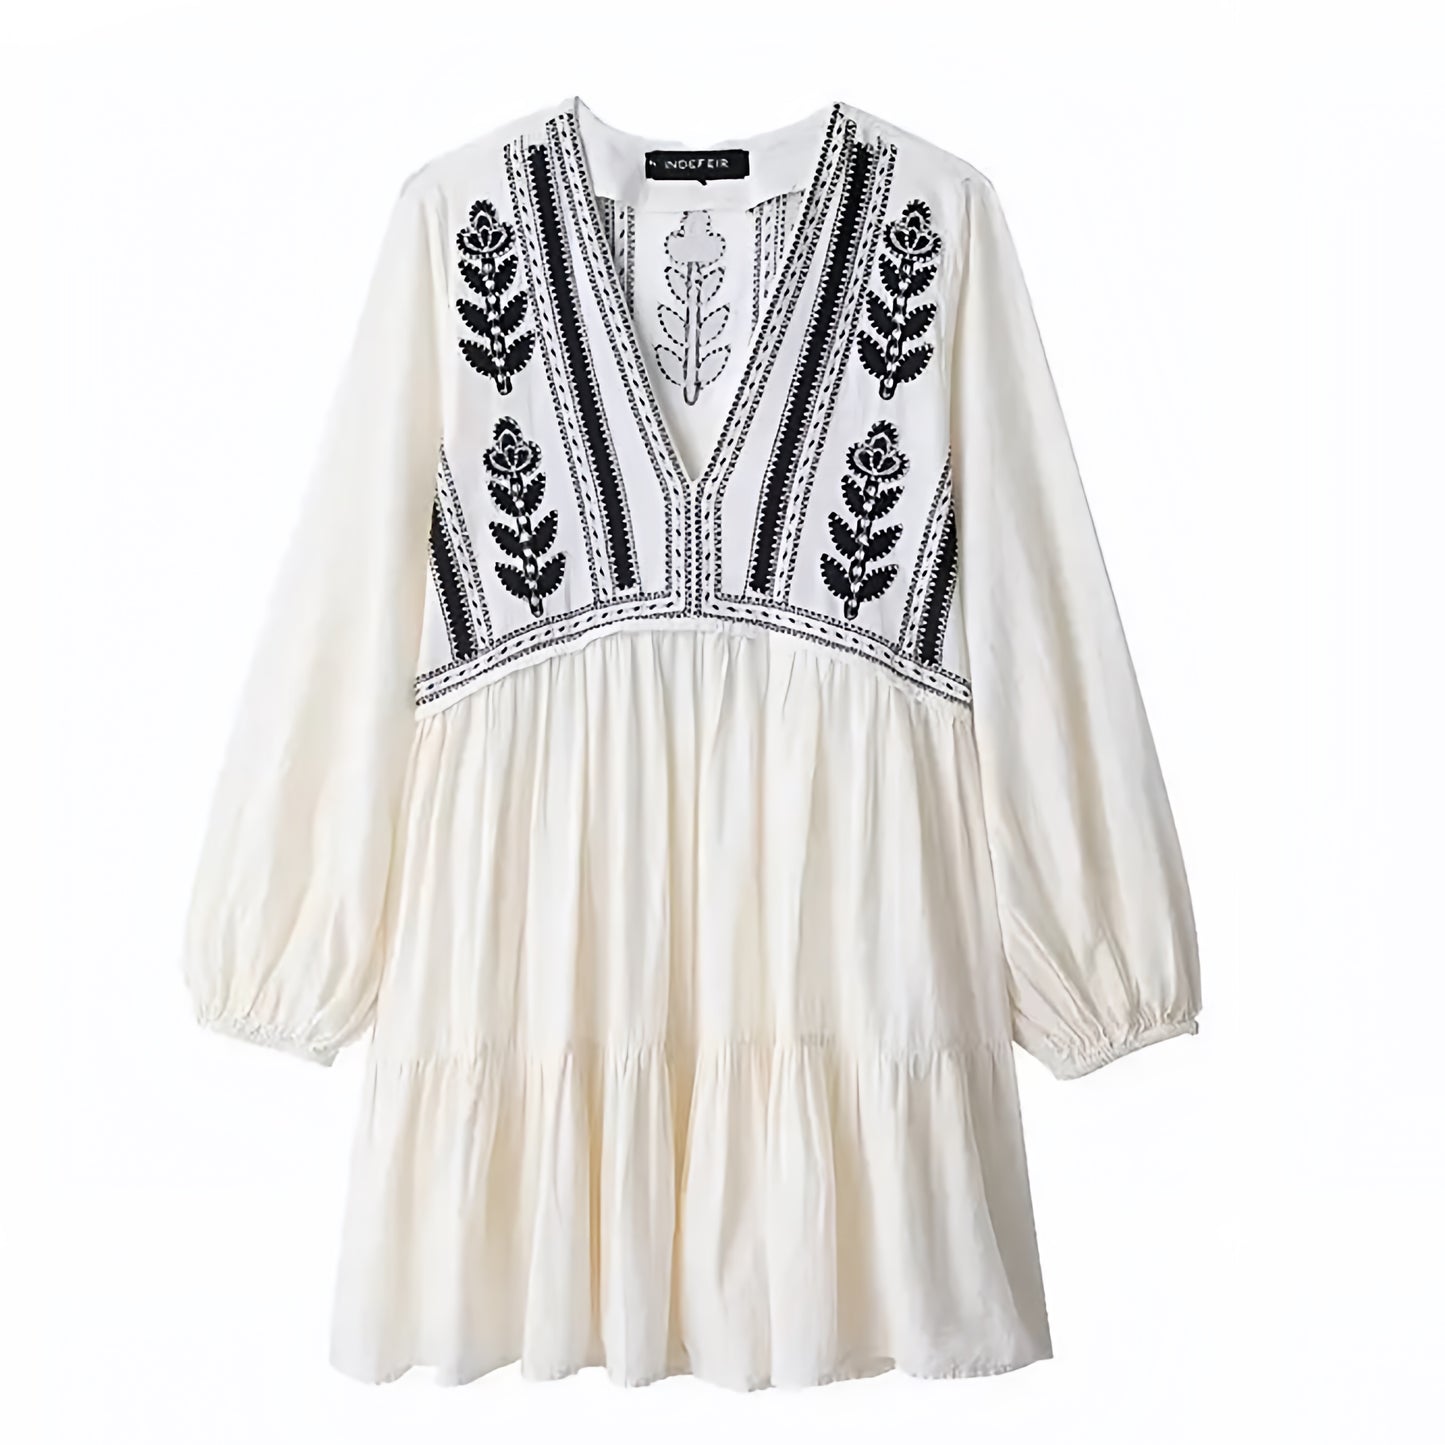 Athens Floral Embroidered V-Neck Tiered Long Puff Sleeve Boho Mini Dress